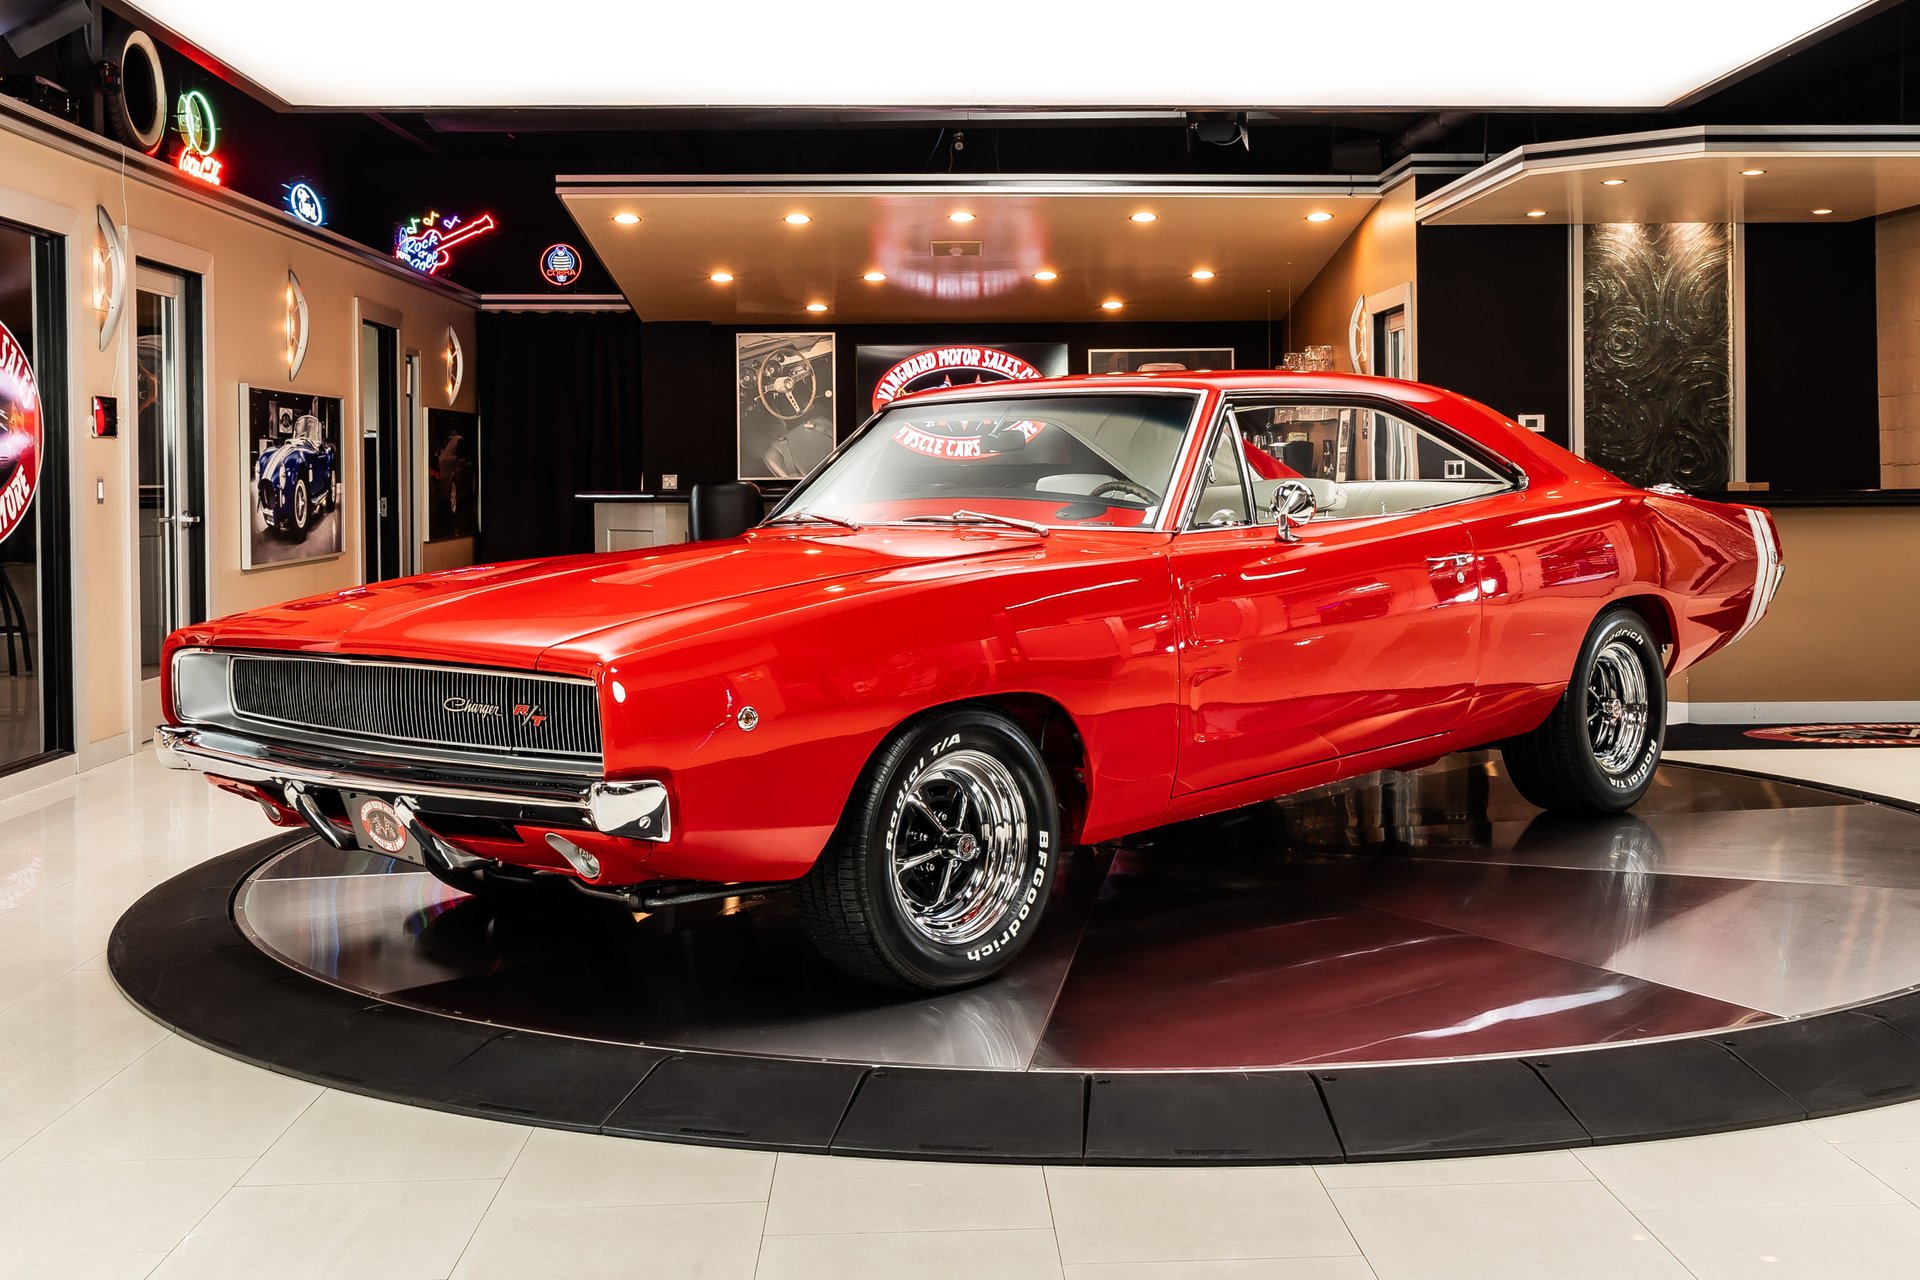 1968 Dodge Charger | Classic Cars for Sale Michigan: Muscle & Old Cars | Vanguard  Motor Sales